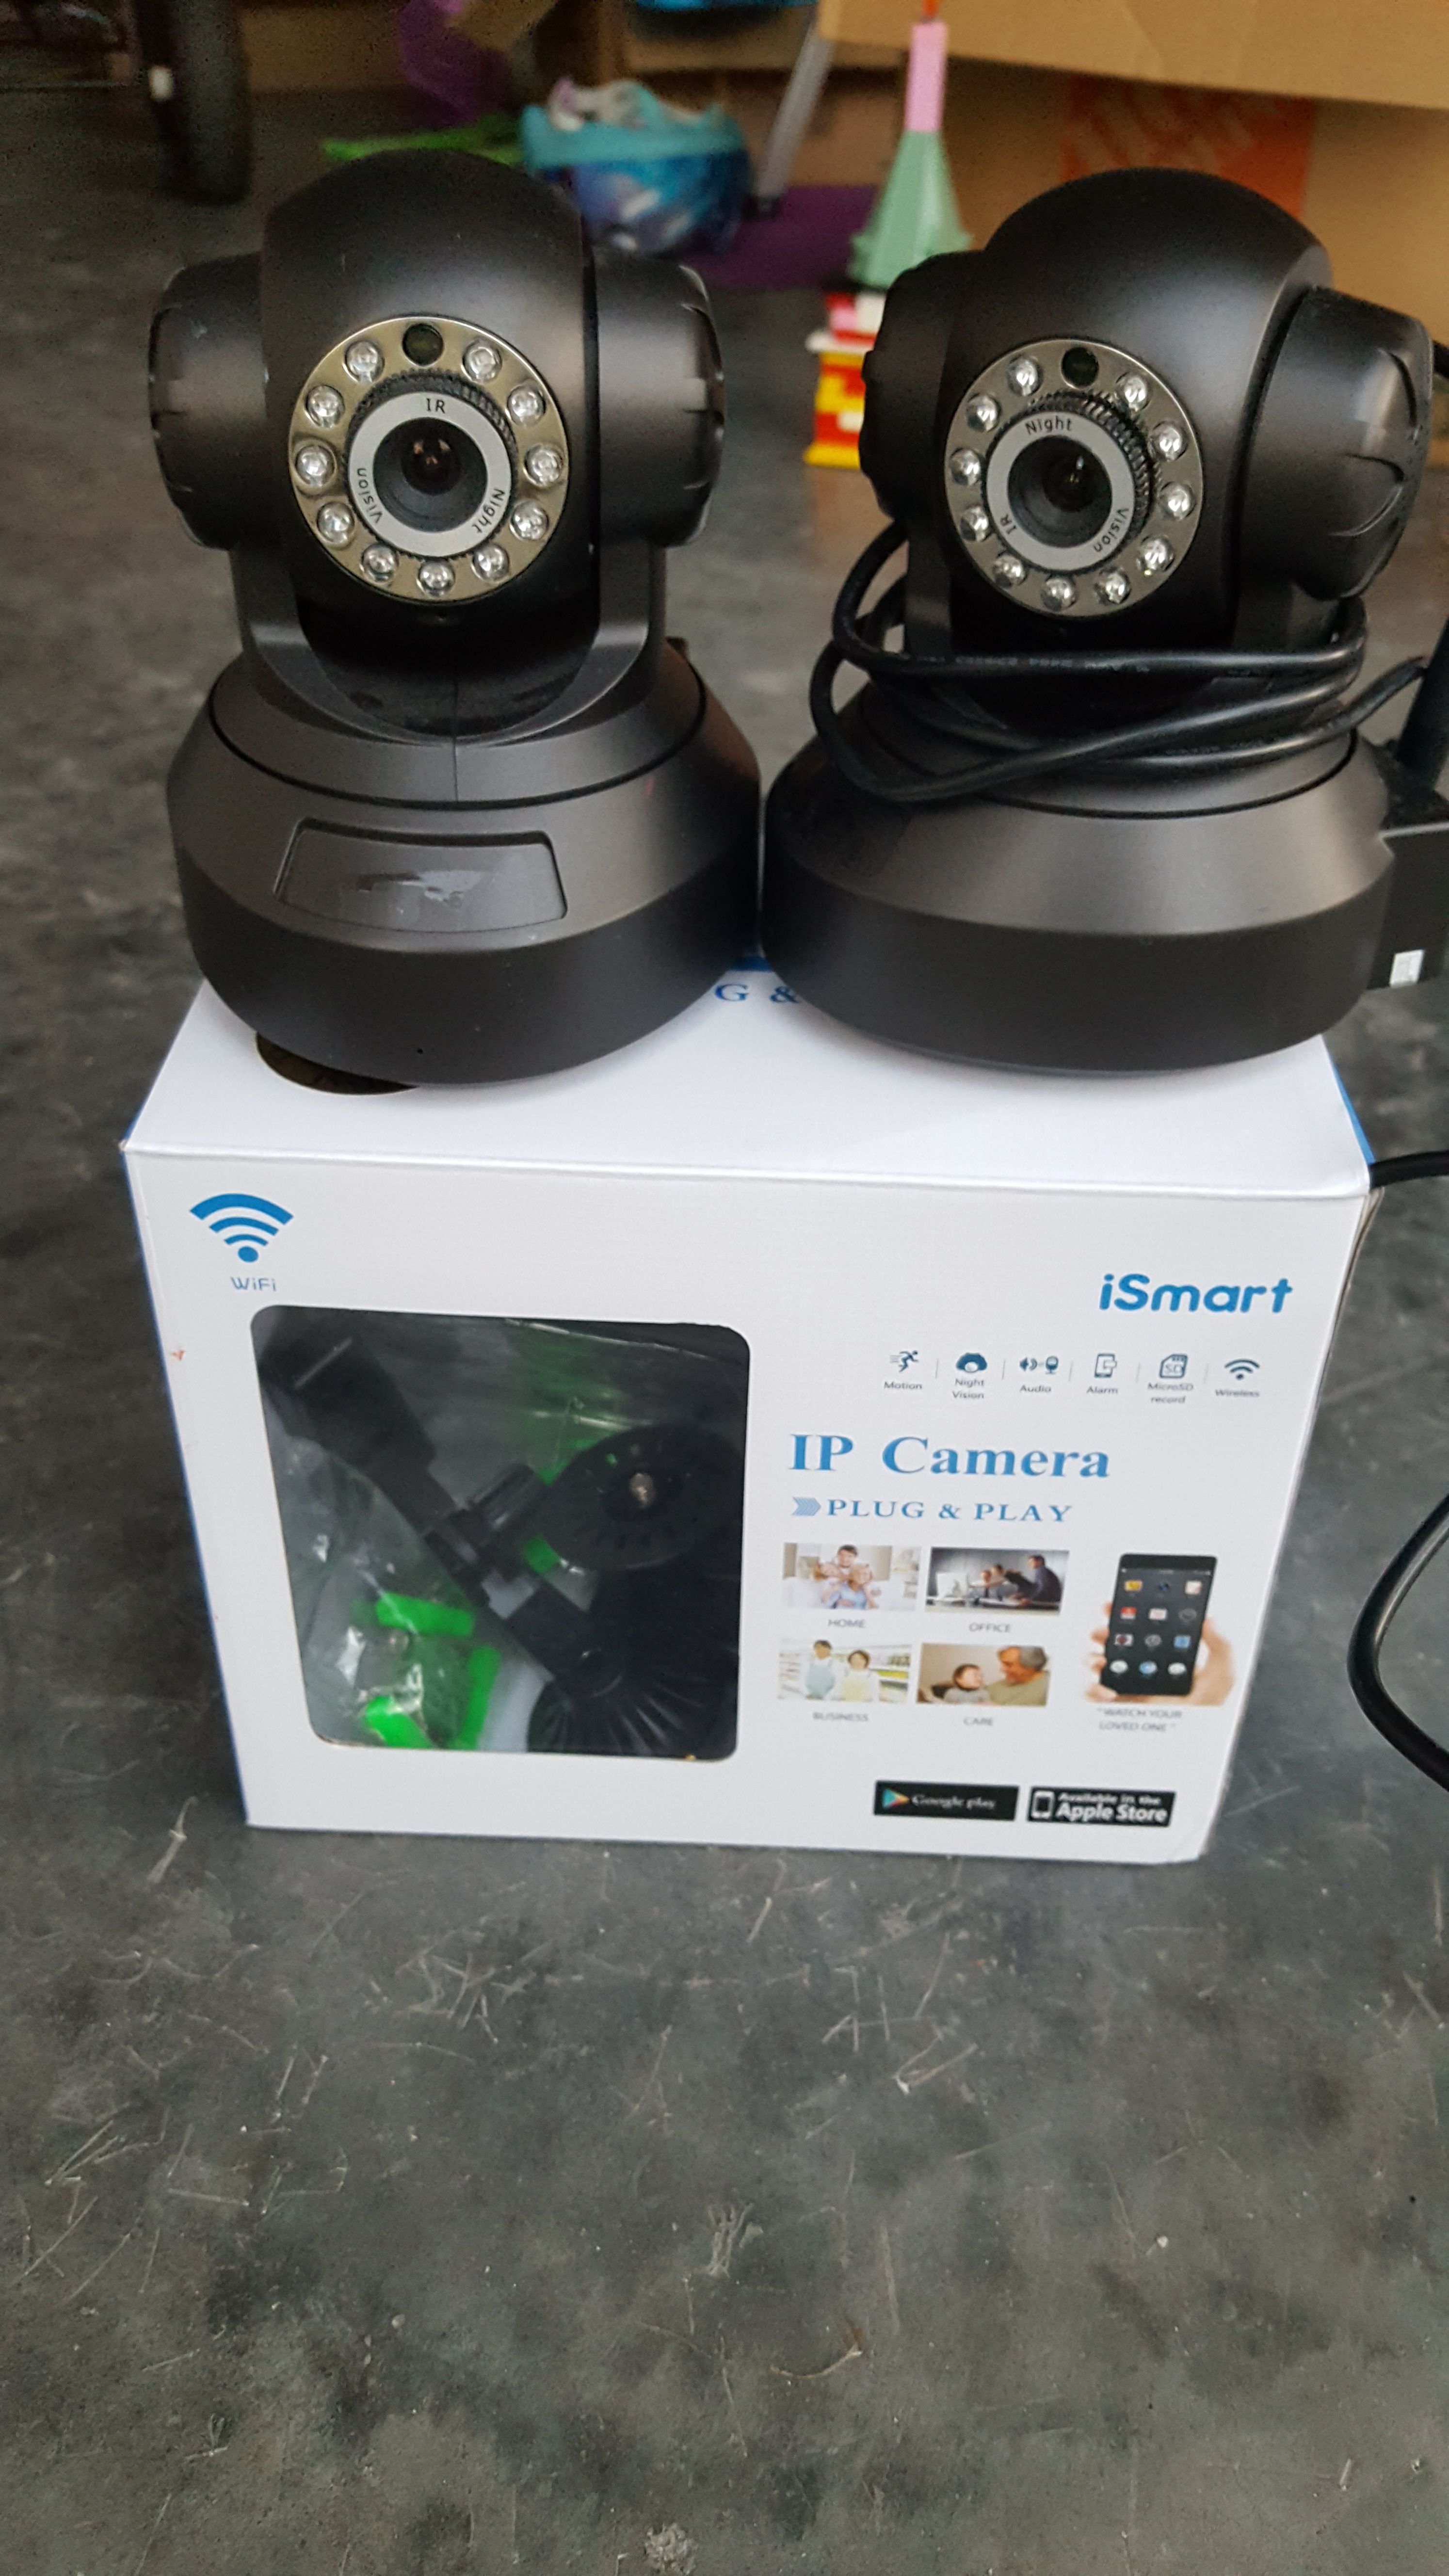 IP camera, Wi-Fi, view on mobile app